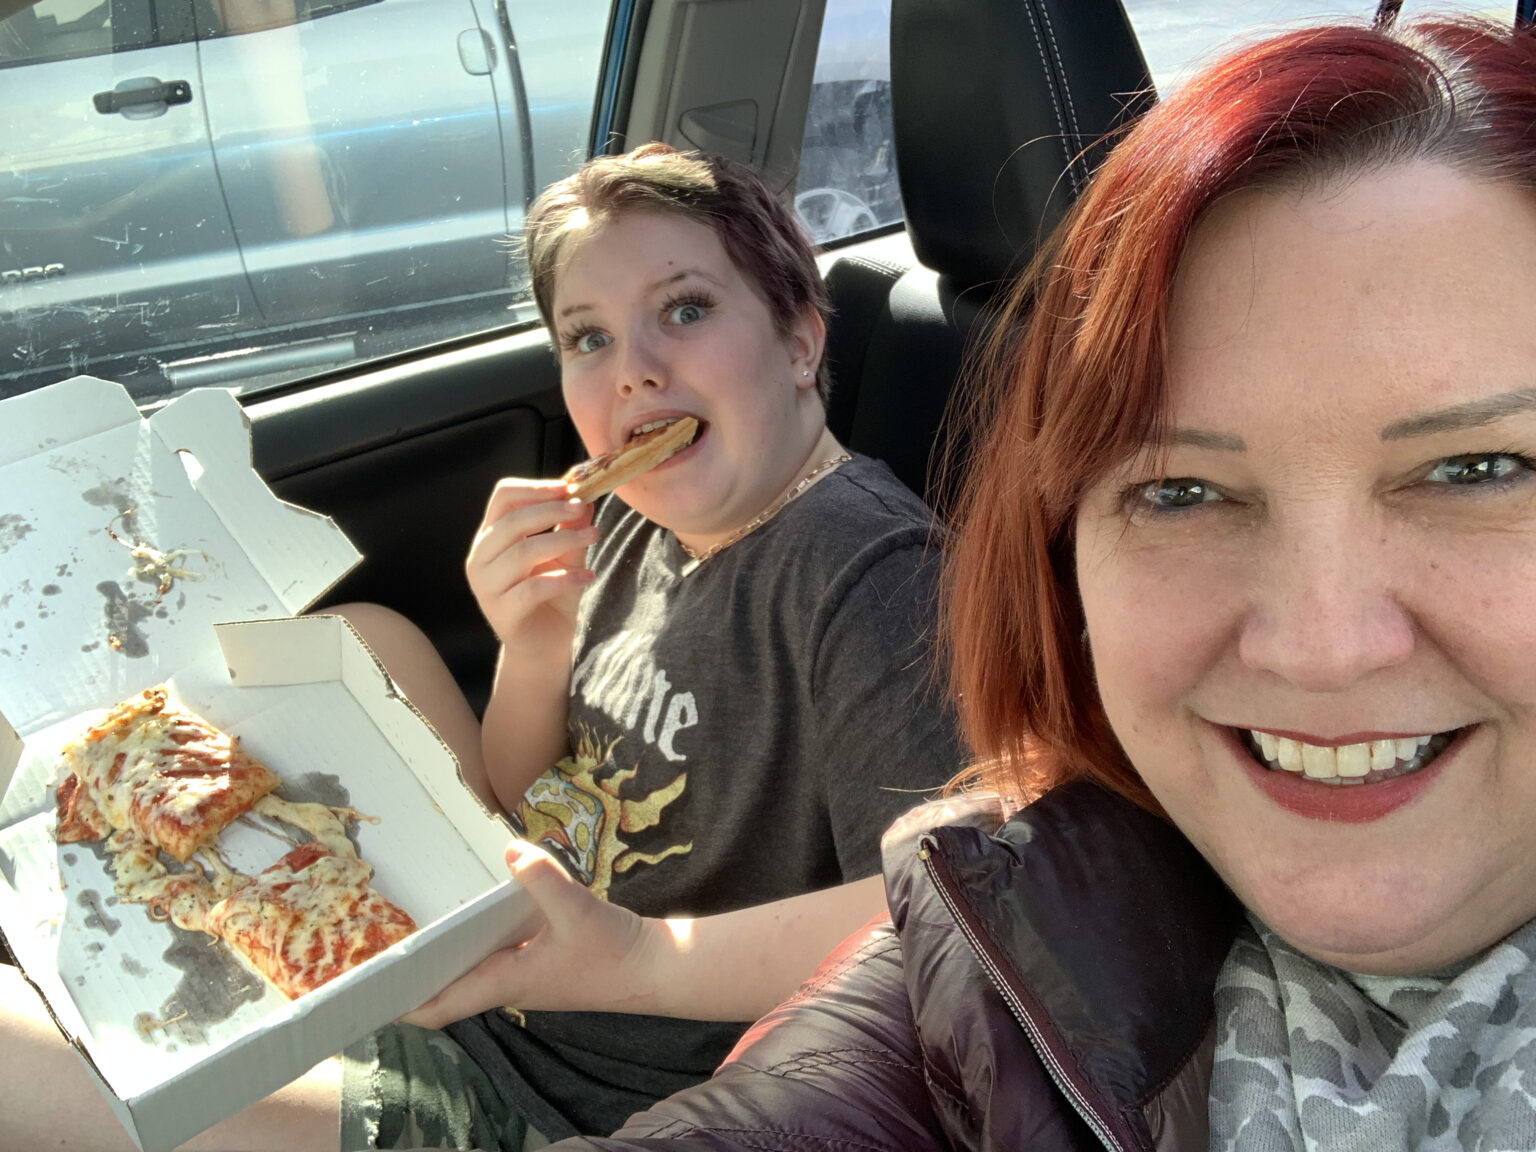 Why we love pizza picnics in the car - Midlife Mama